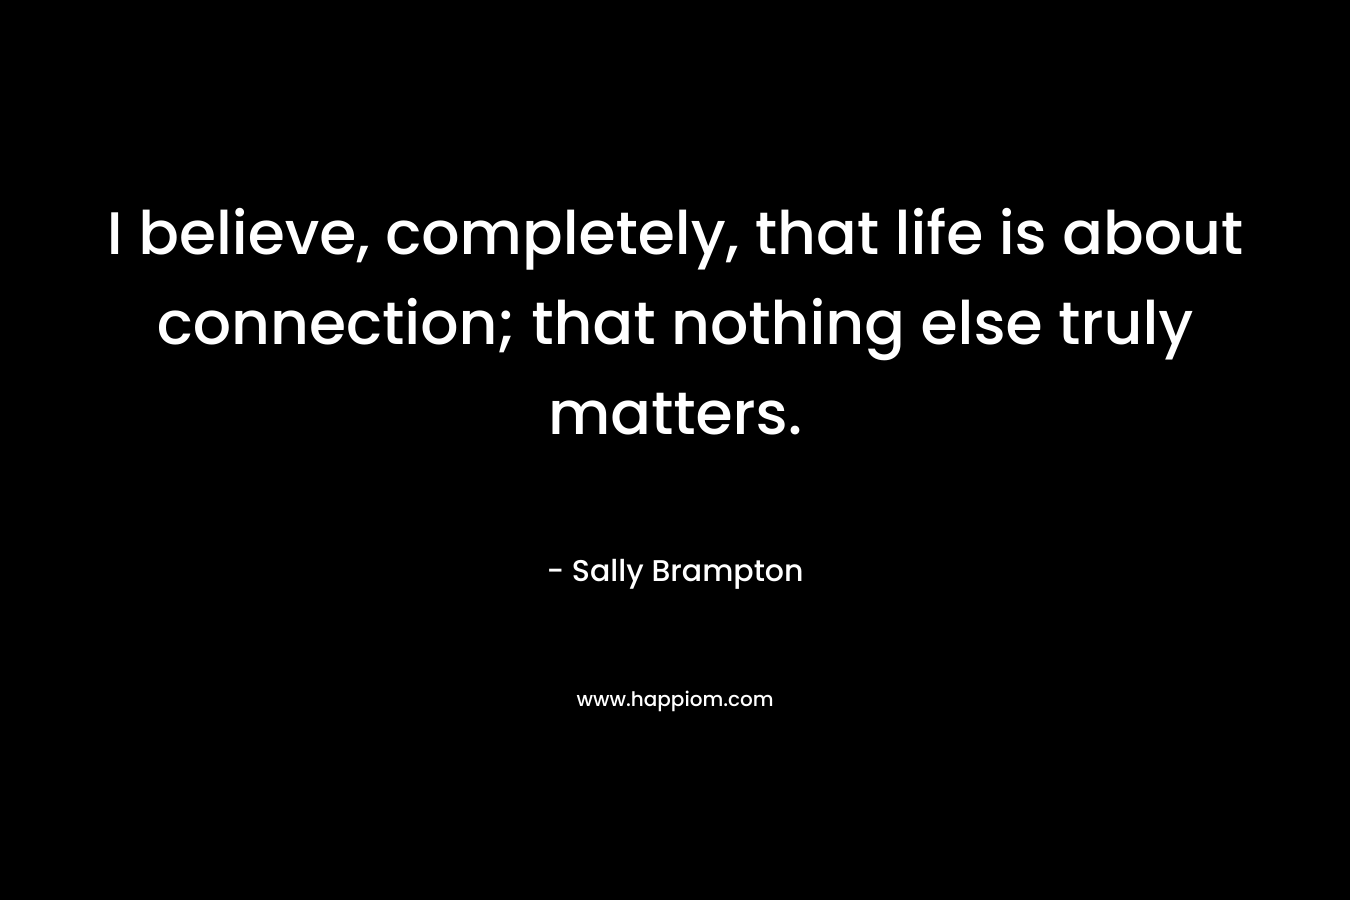 I believe, completely, that life is about connection; that nothing else truly matters.